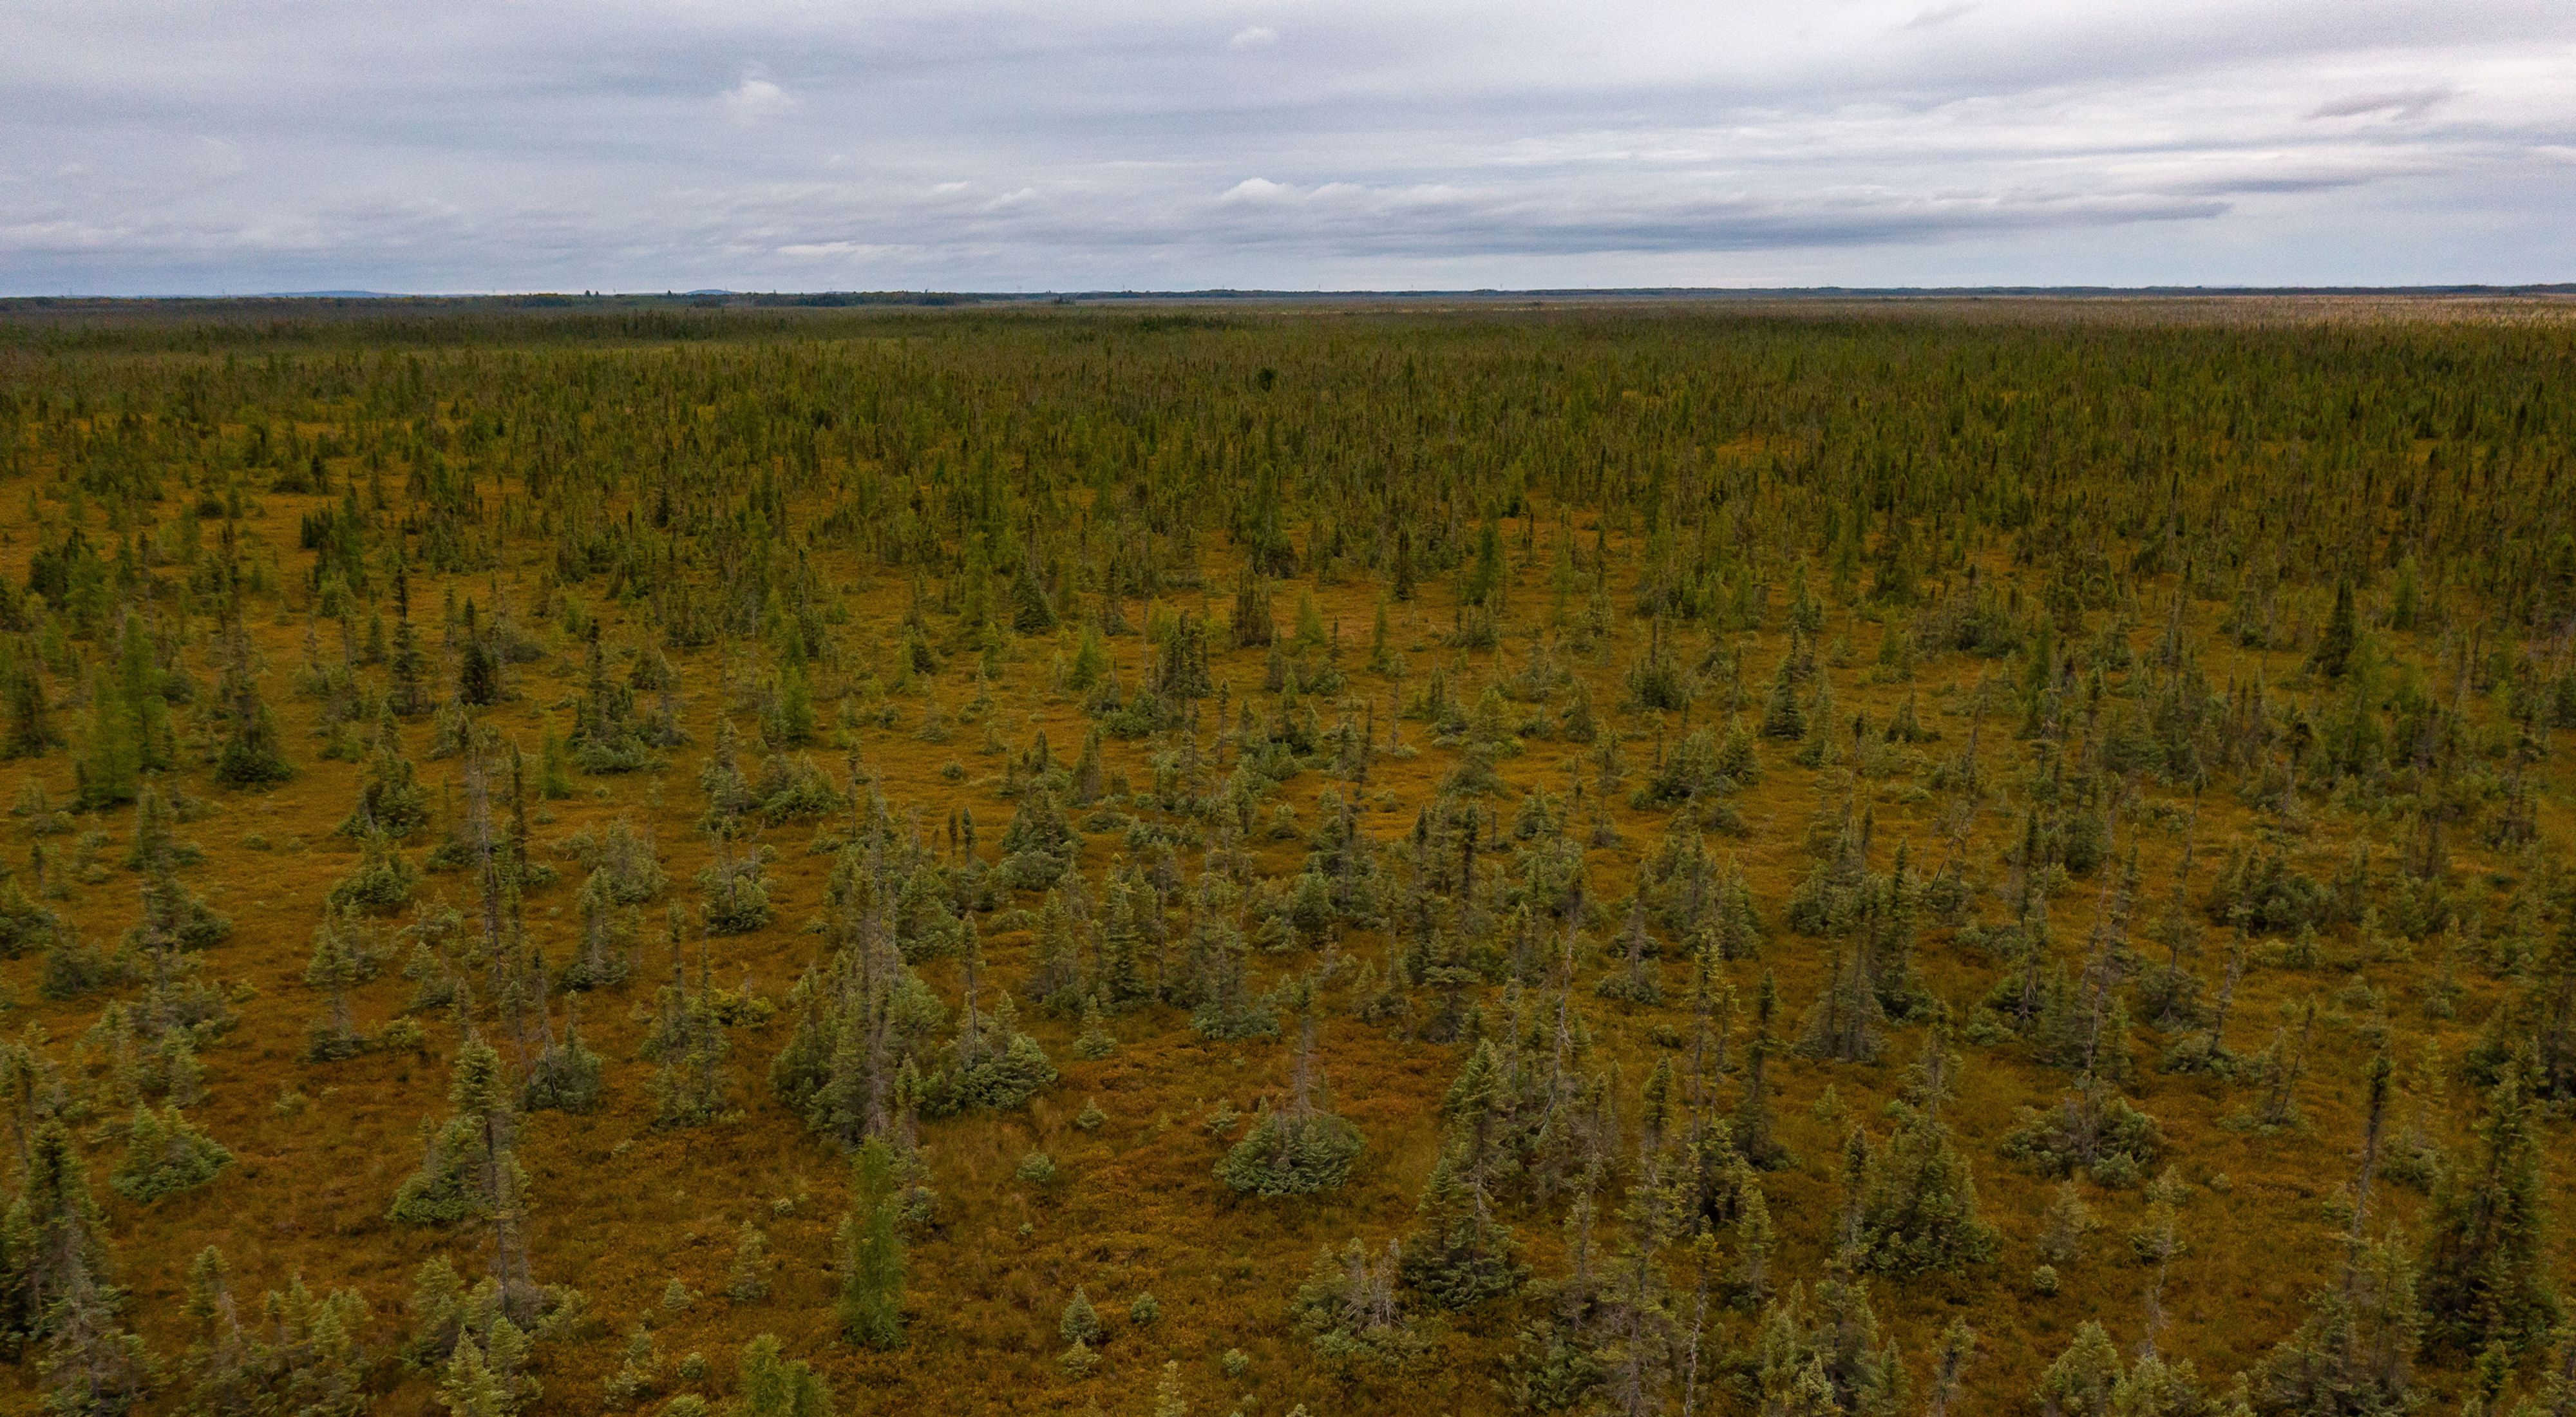  aerial view of a northern peat bog.